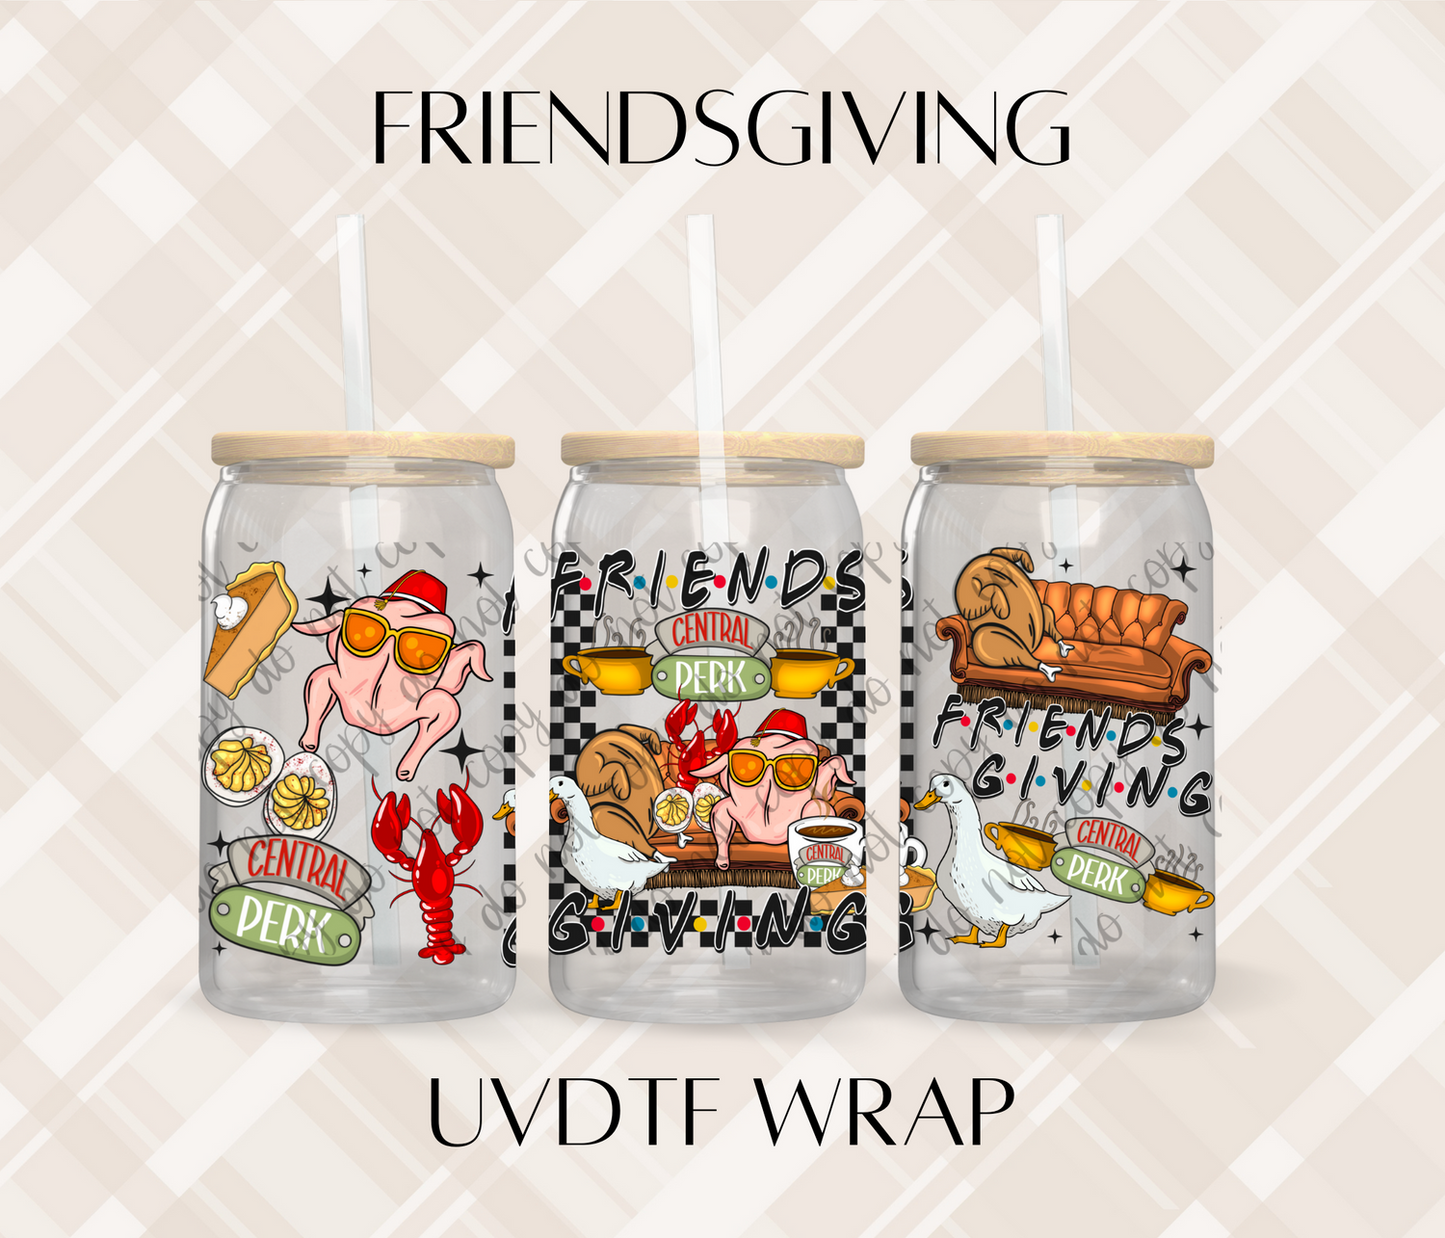 FRIENDSGIVING WRAP AND/OR DECAL